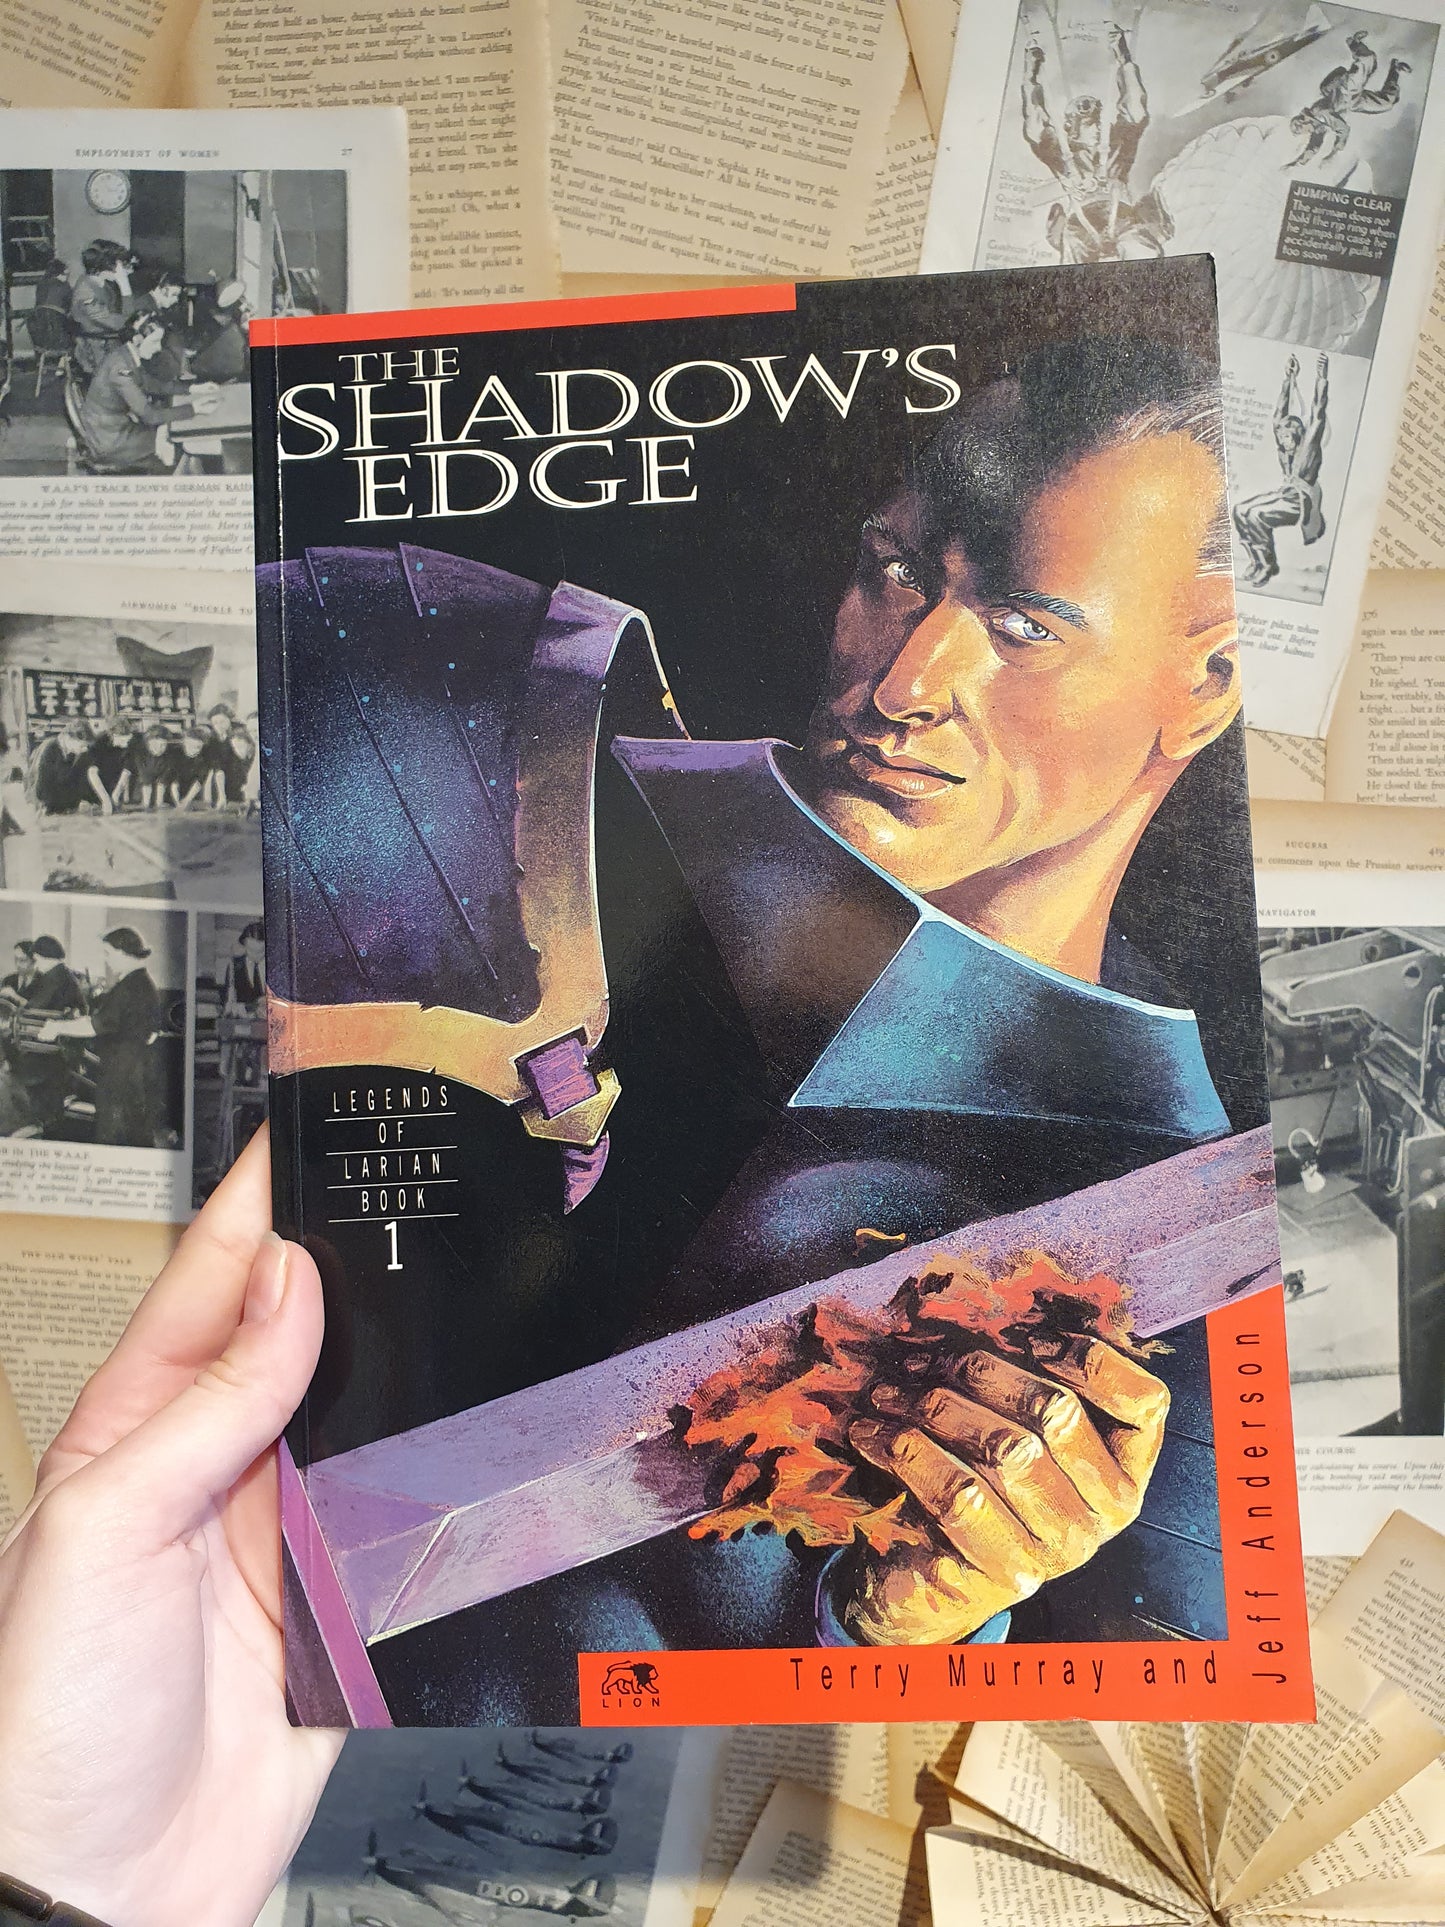 Legends of Larian Book 1: The Shadow's Edge by Murray & Anderson (1992)